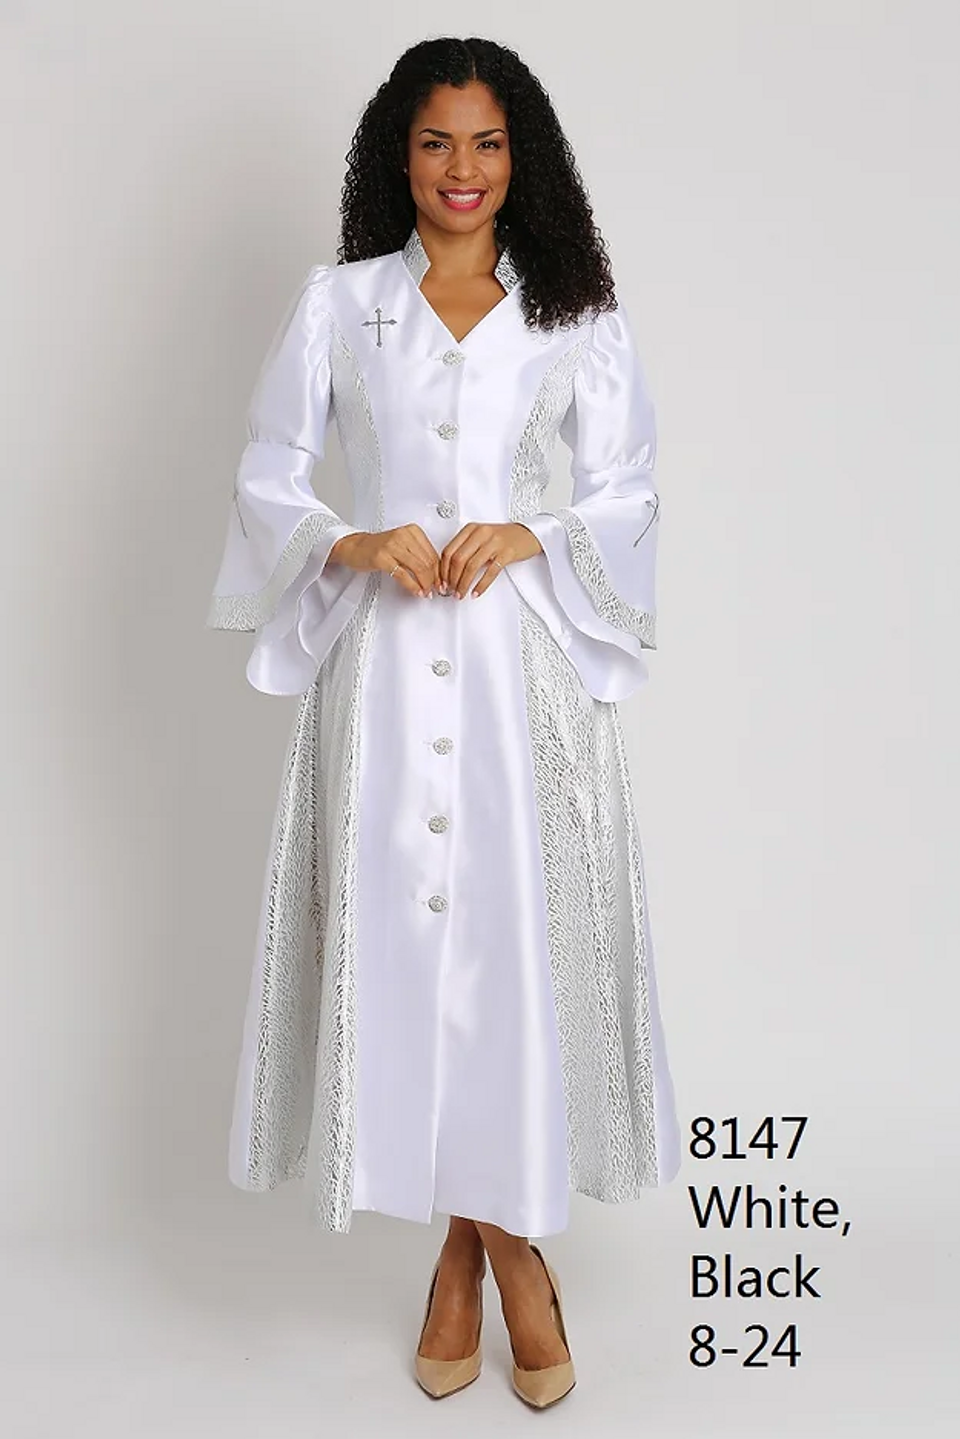 Elegance Fashions | Diana 8147 Women Clergy Robe - 4 Colors